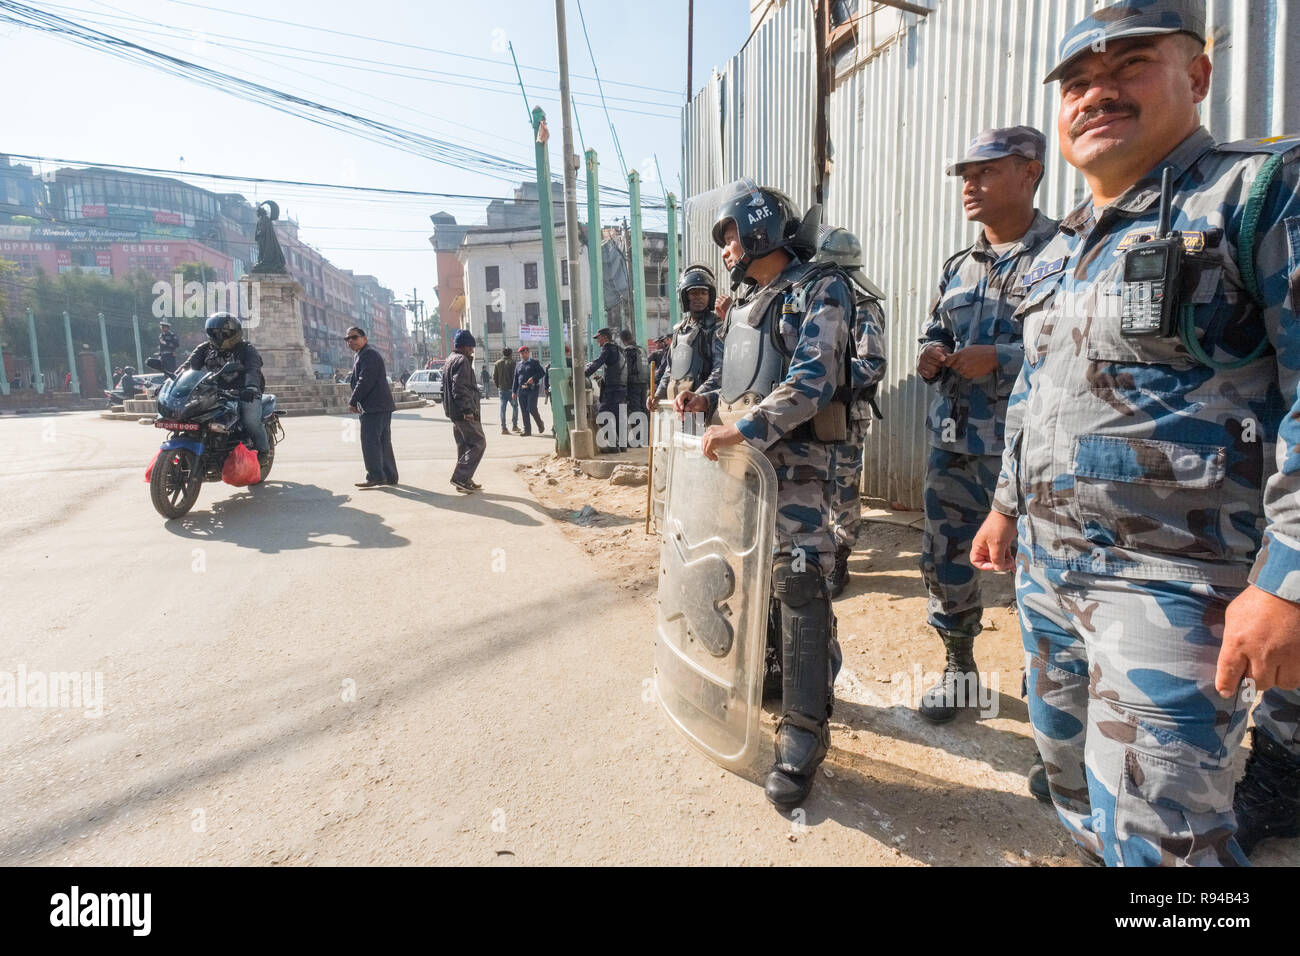 Police in riot gear on the streets of the Nepal capital city Kathmandu Stock Photo